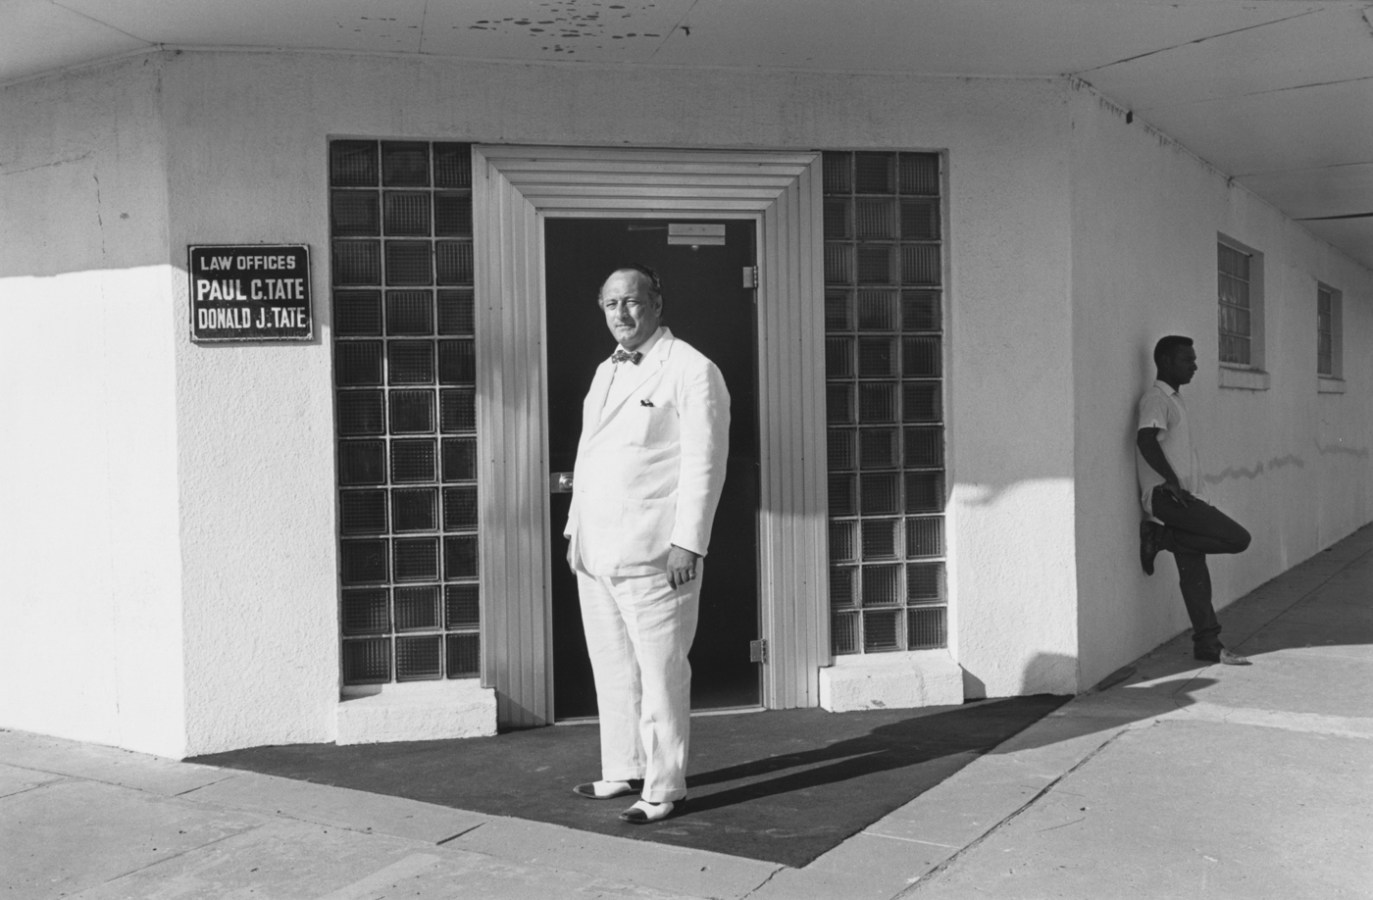 Black-and-white photograph of a man in a white suit standing in front of a doorway and another man to his right in the background